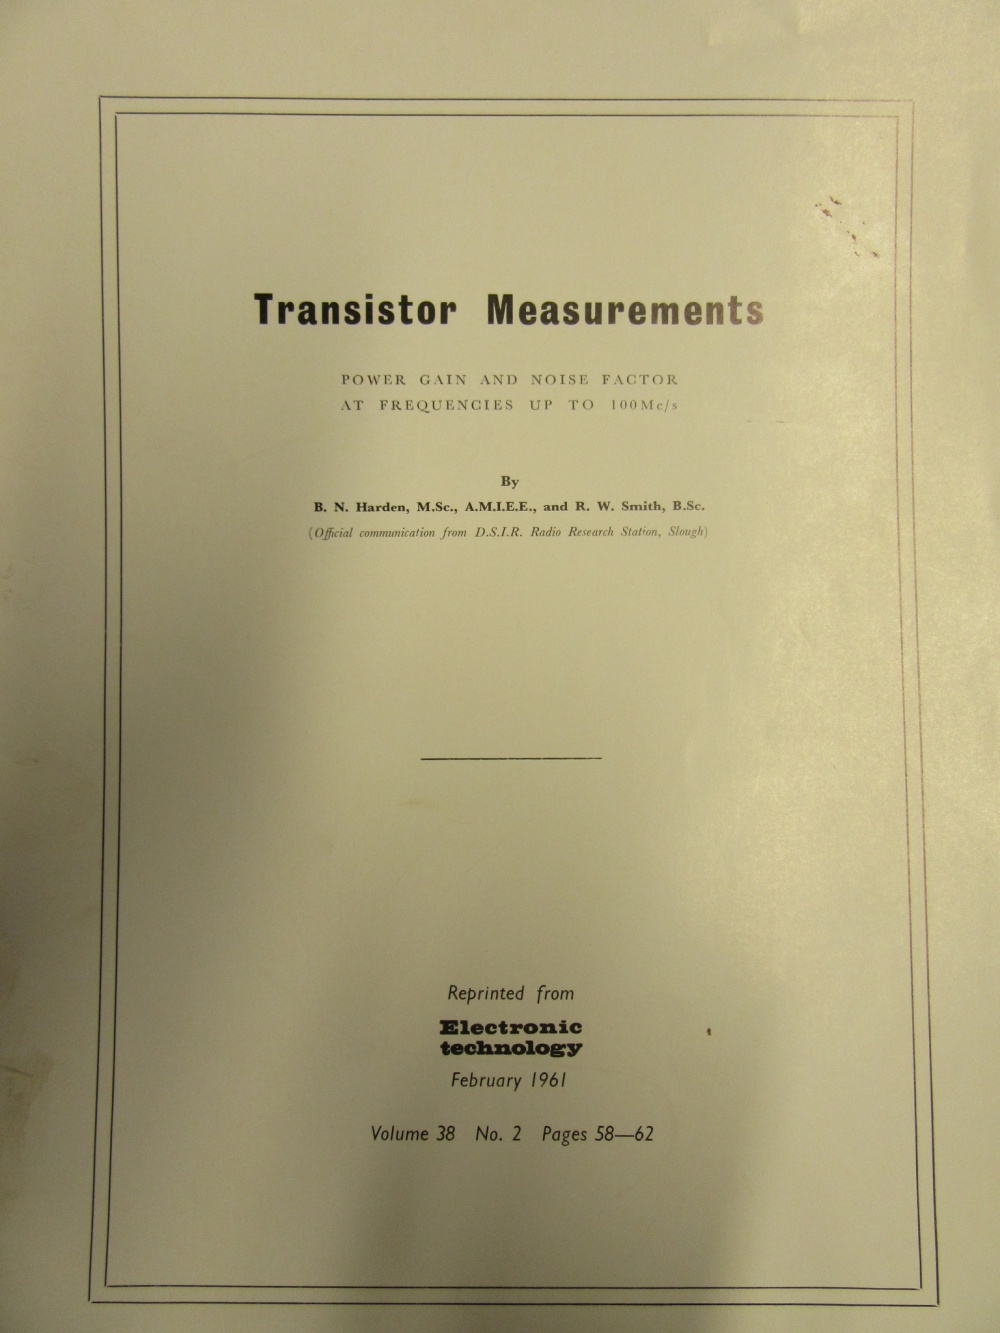 Article: 1950s Transistor Research Papers with Photographs and Author Information